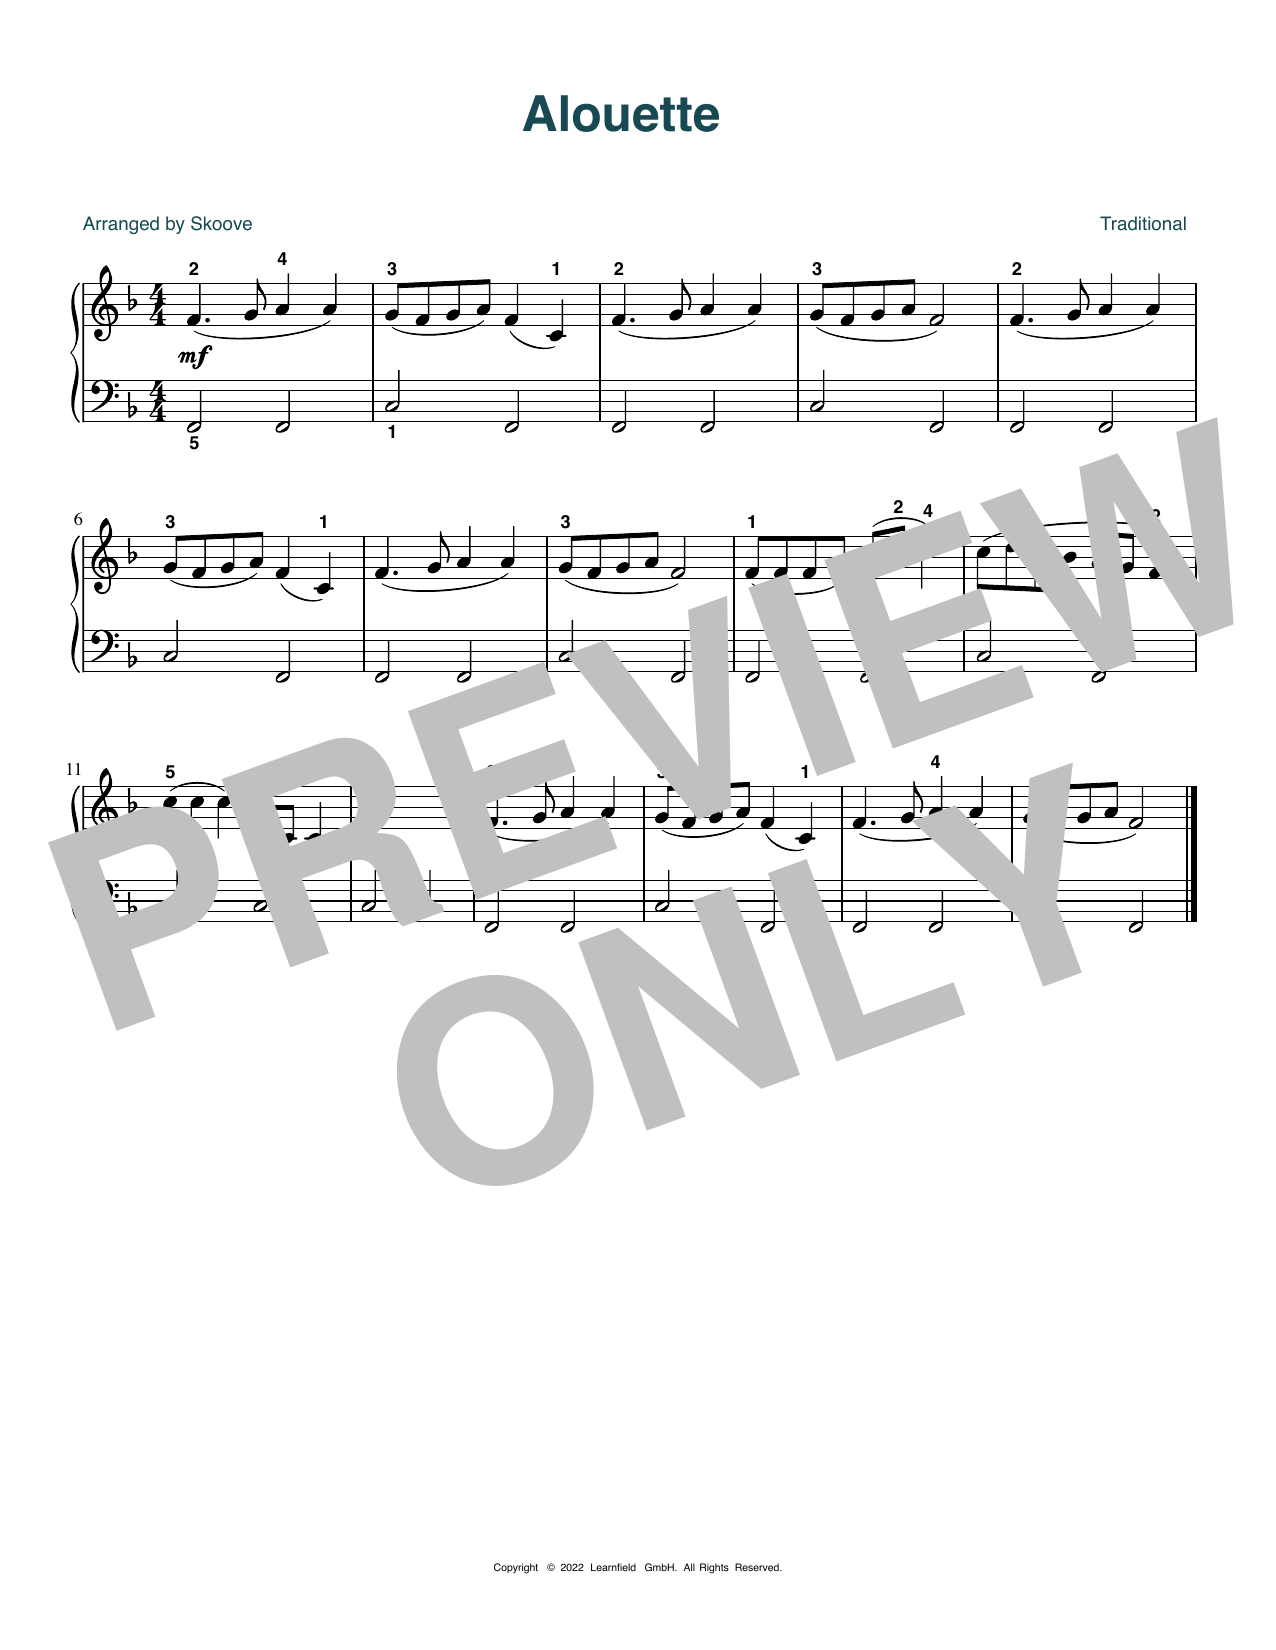 Download Traditional Alouette (arr. Skoove) Sheet Music